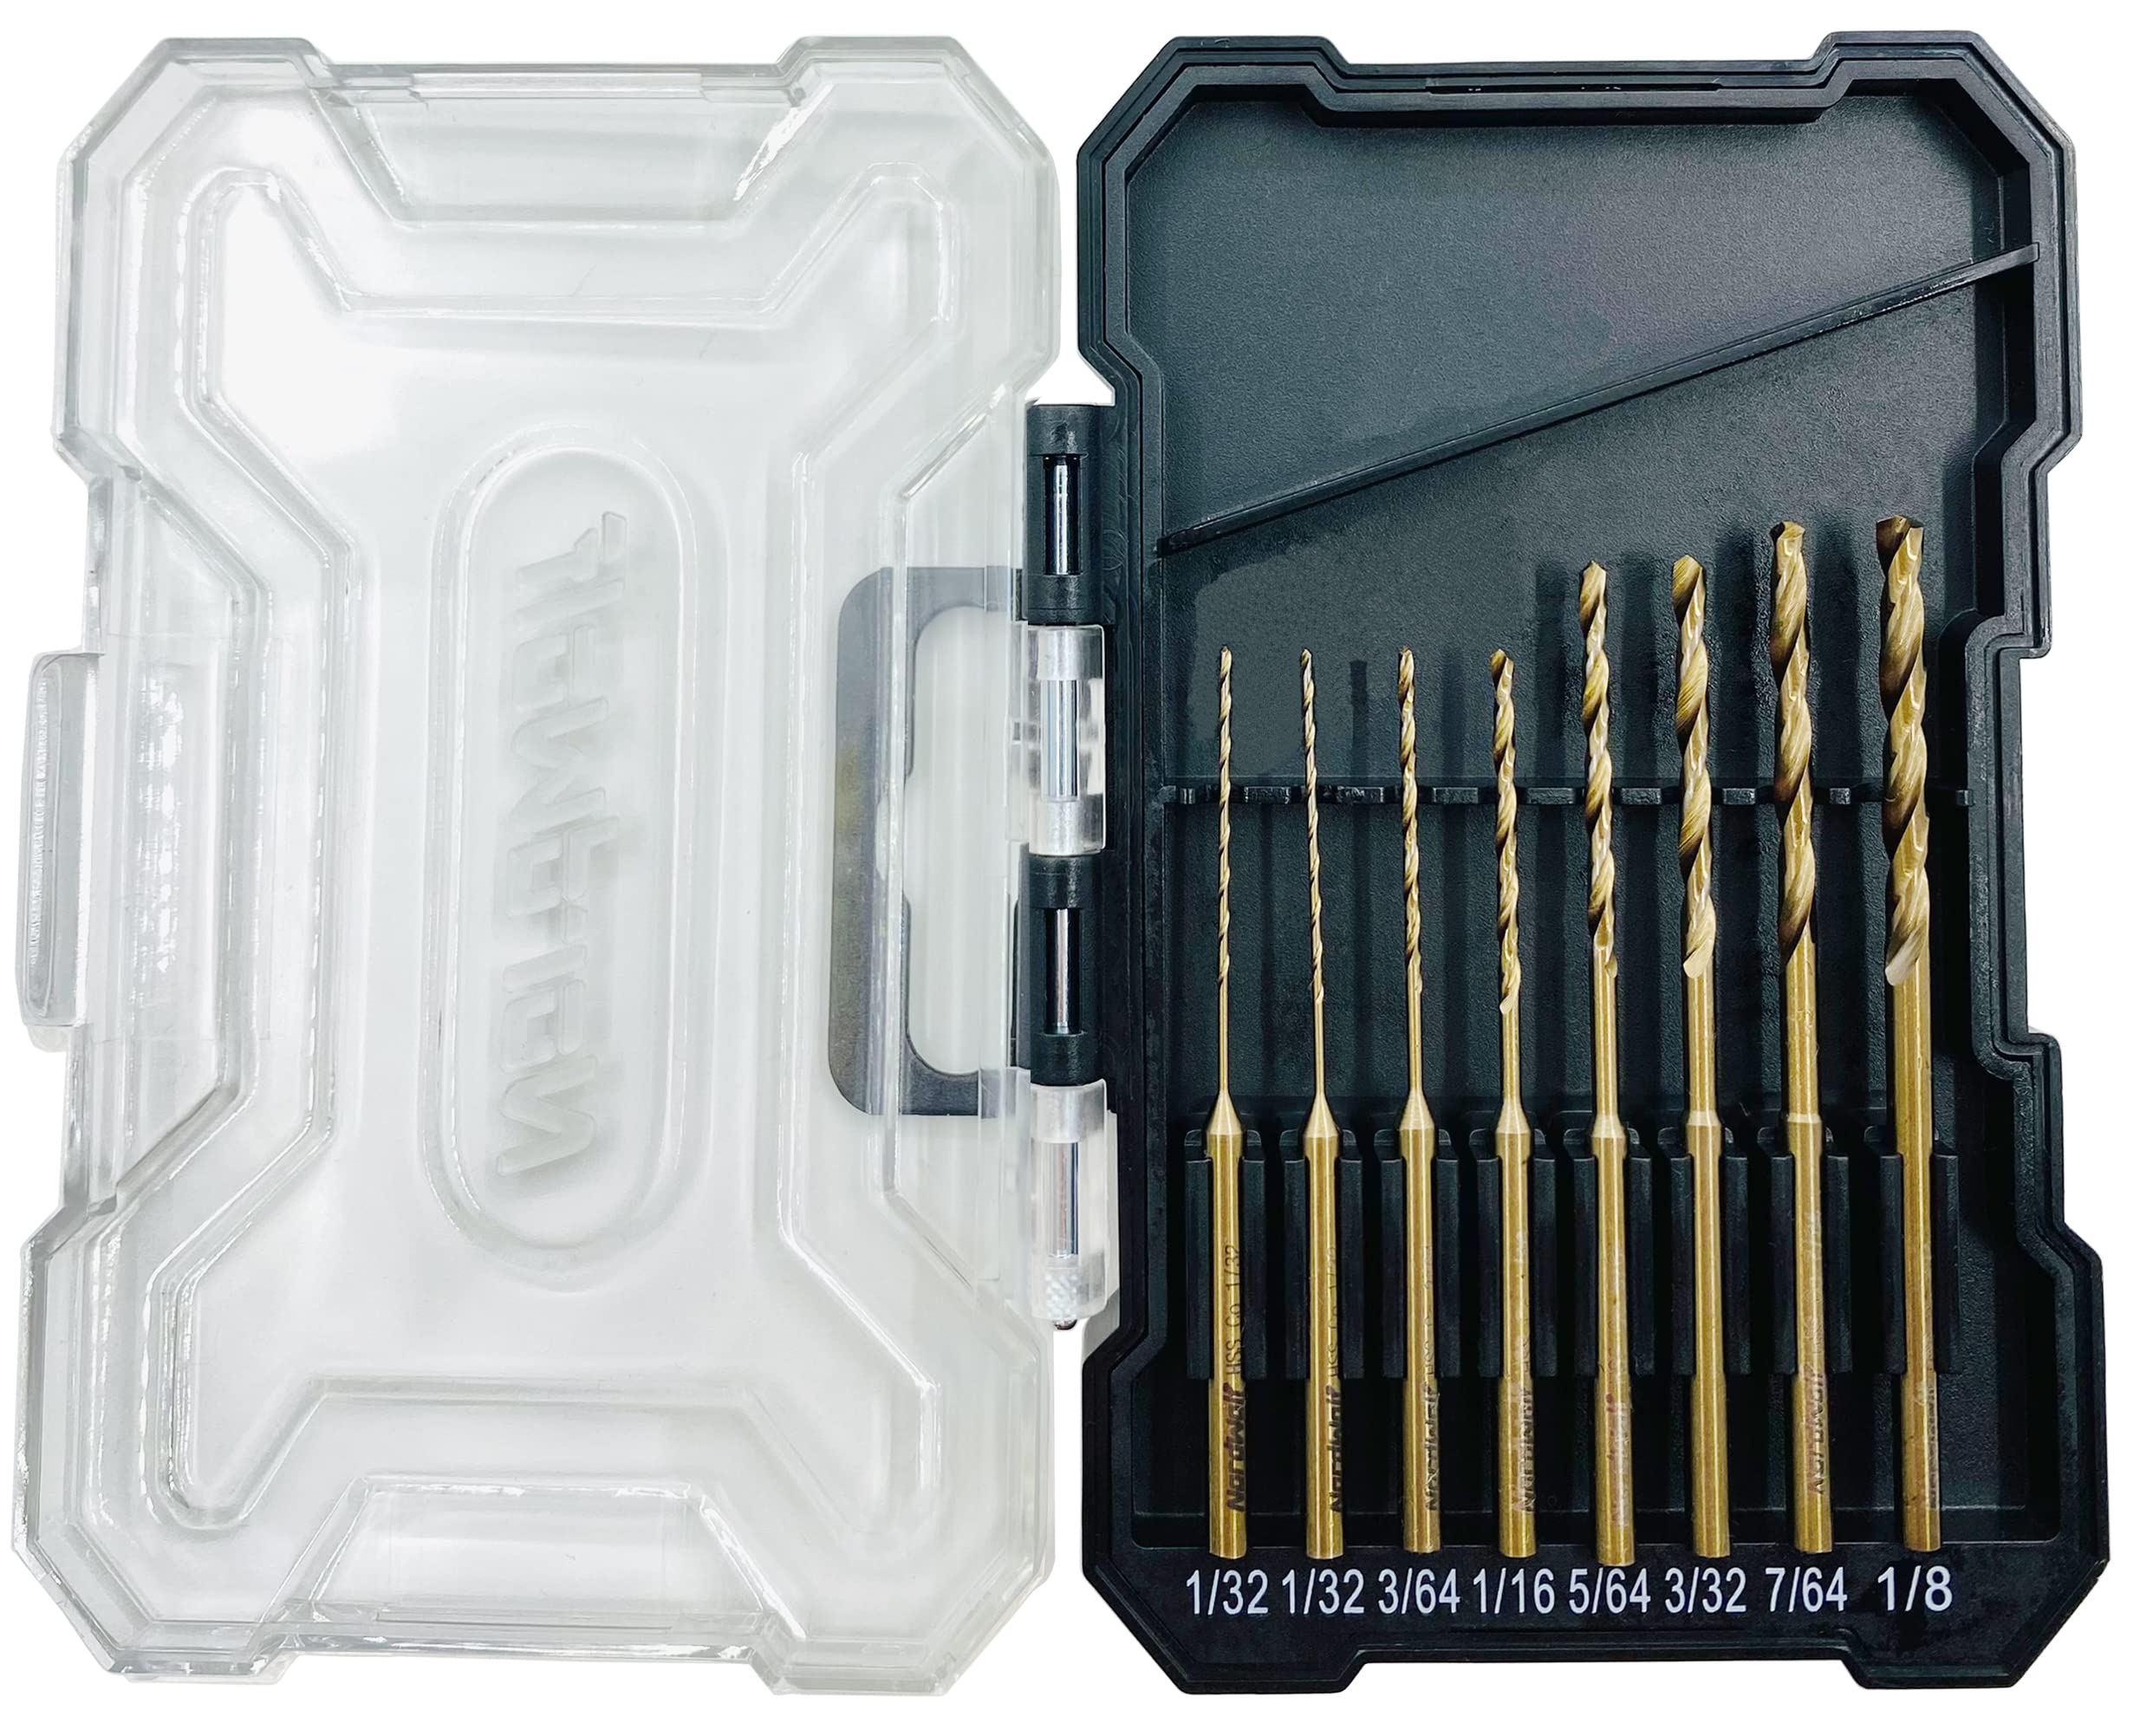 NordWolf 8-Piece M35 Cobalt Multi-Purpose Drill Bit Set, with 1/8" Straight Round Shank for Rotary Tools, SAE Sizes 1/32"(x2)-3/64"-1/16"-5/64"-3/32"-7/64"-1/8" in Storage Case